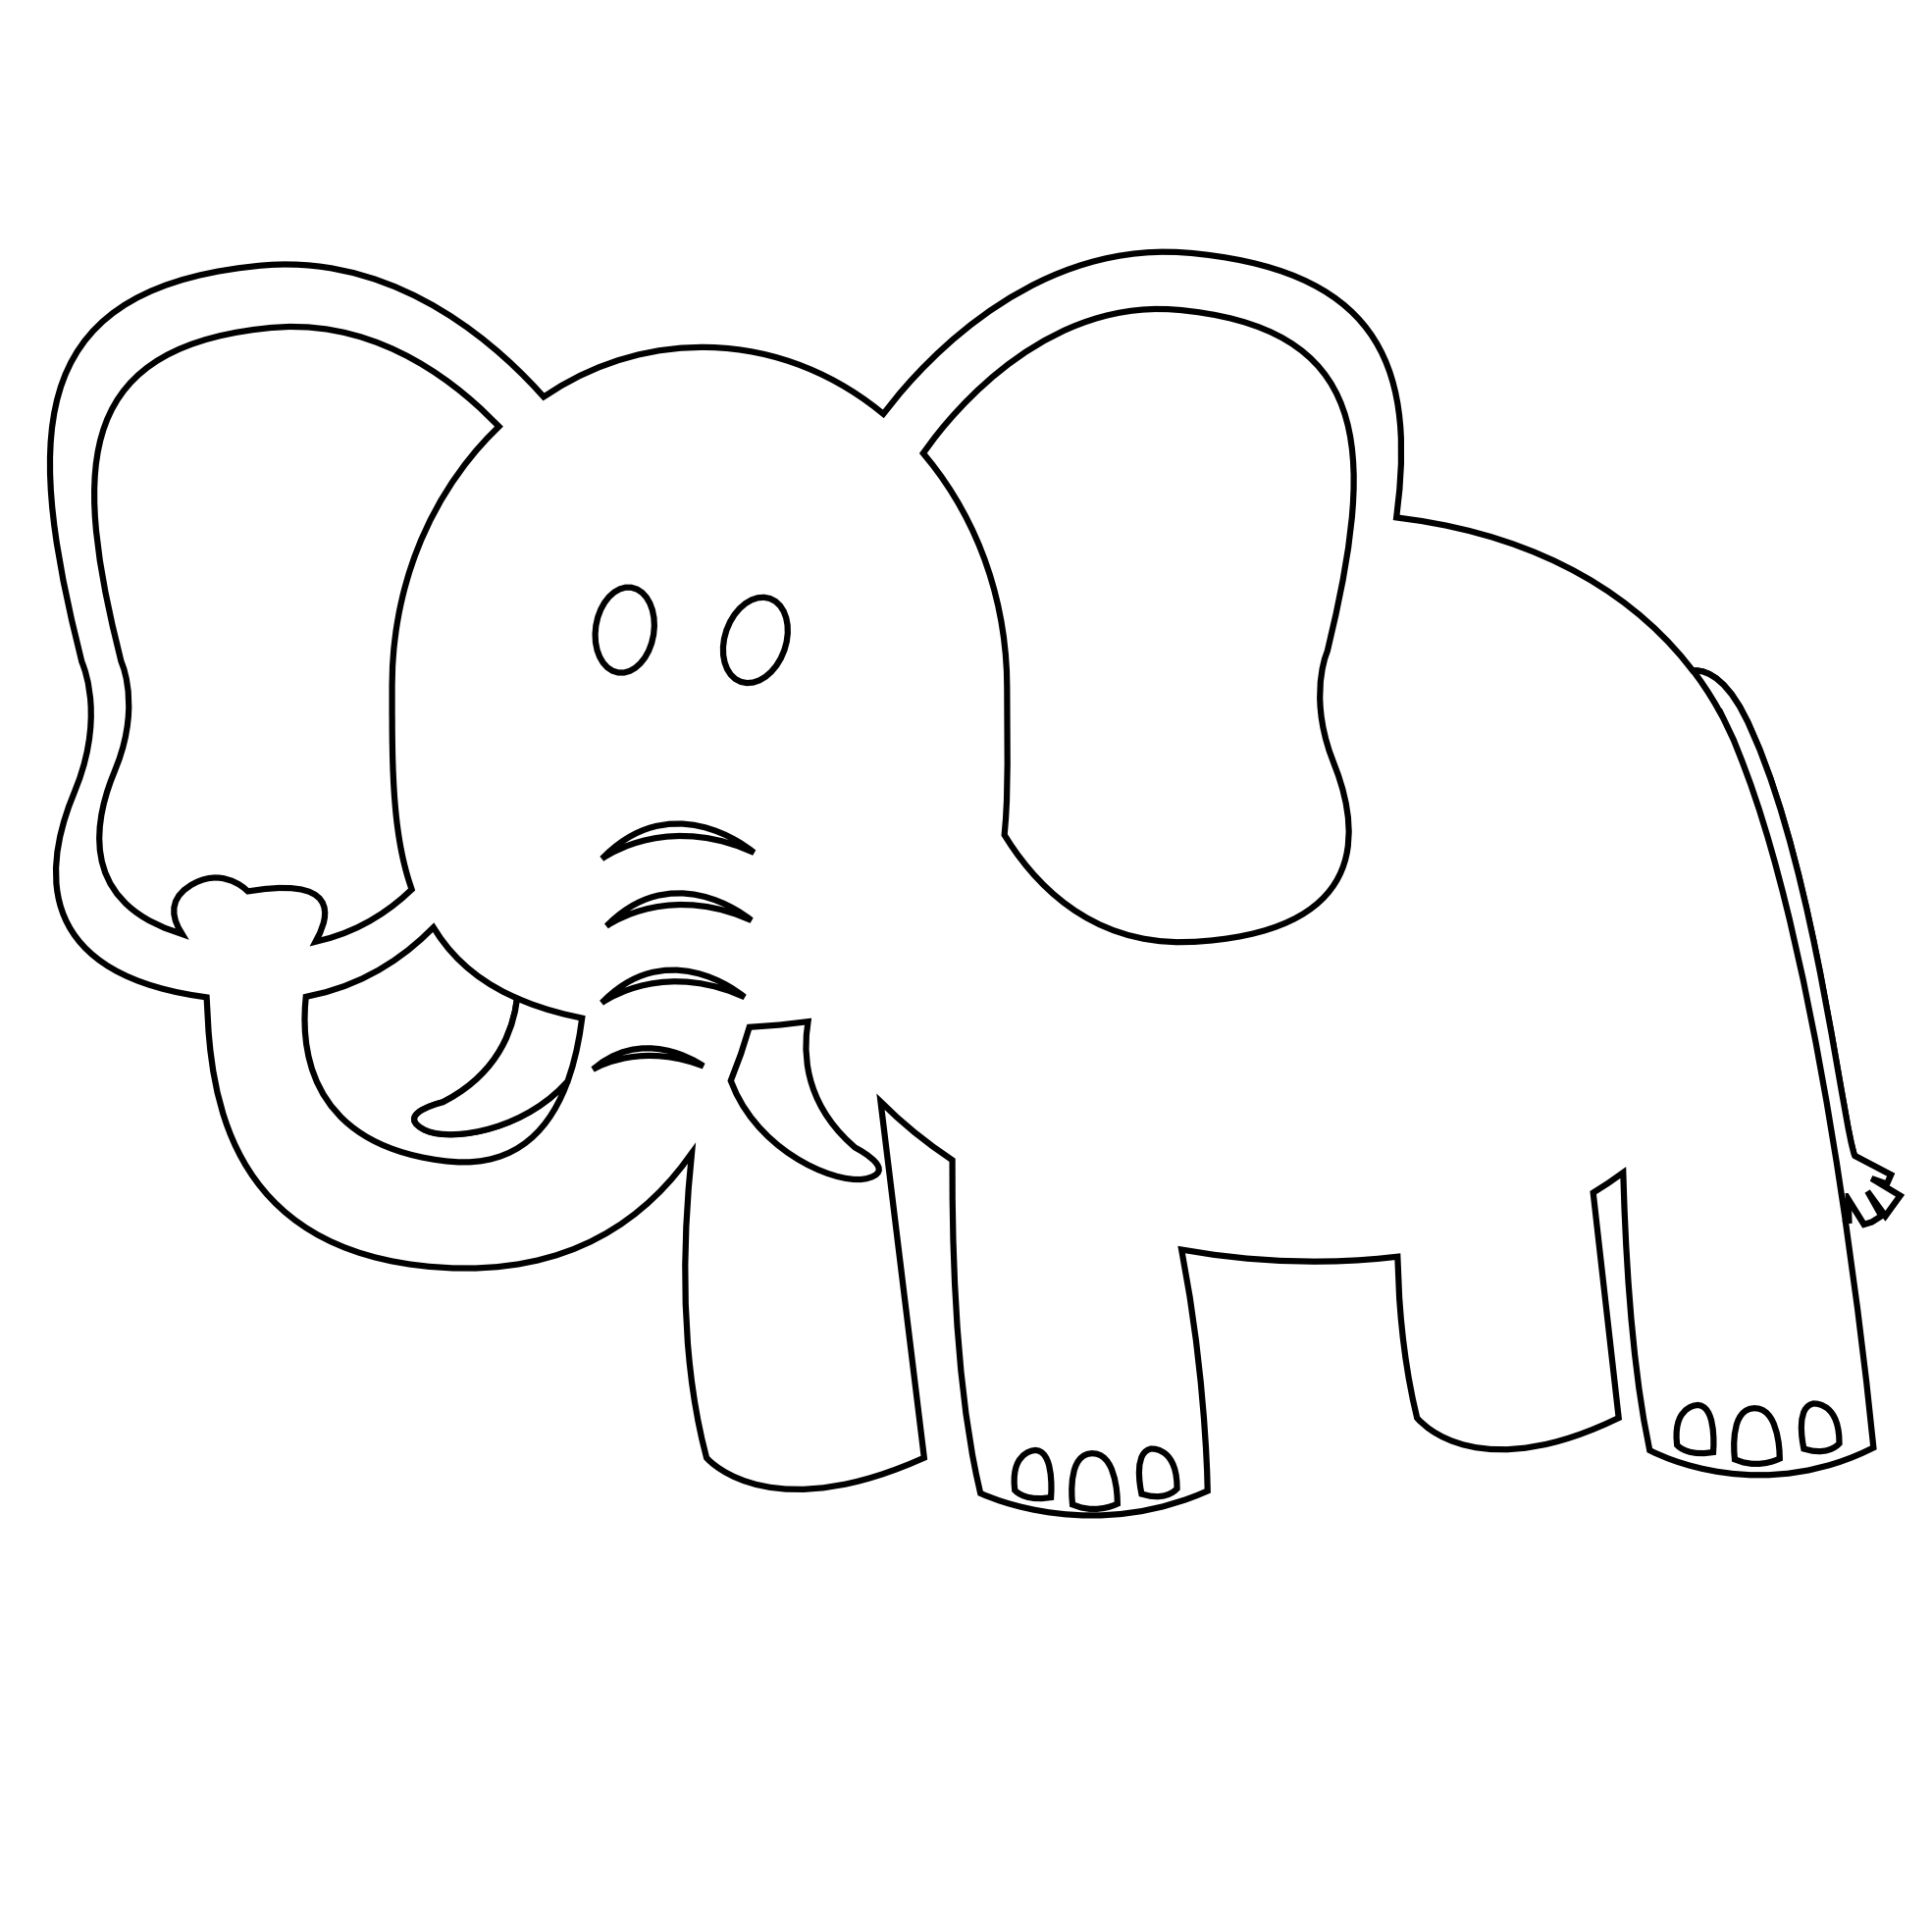 Elephant clipart ethnic, Elephant ethnic Transparent FREE for download ...